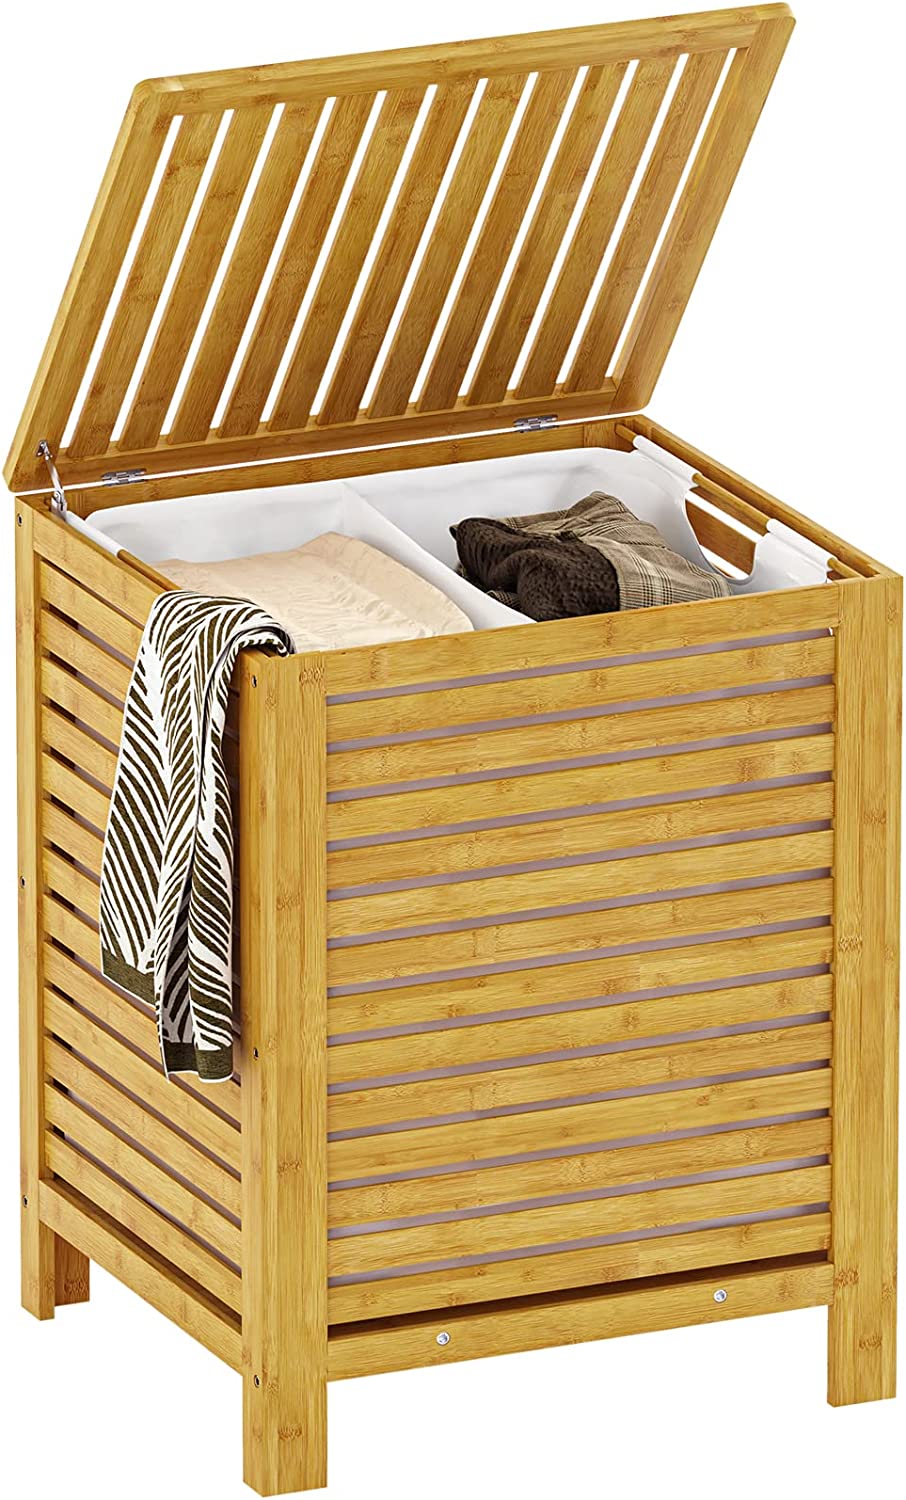 Beauty Panda Large Section Freestanding Teak wood Bathroom Organizer with Pull Out Hamper Drawers Wooden Laundry Towel Cabinet Basket (Bin10)